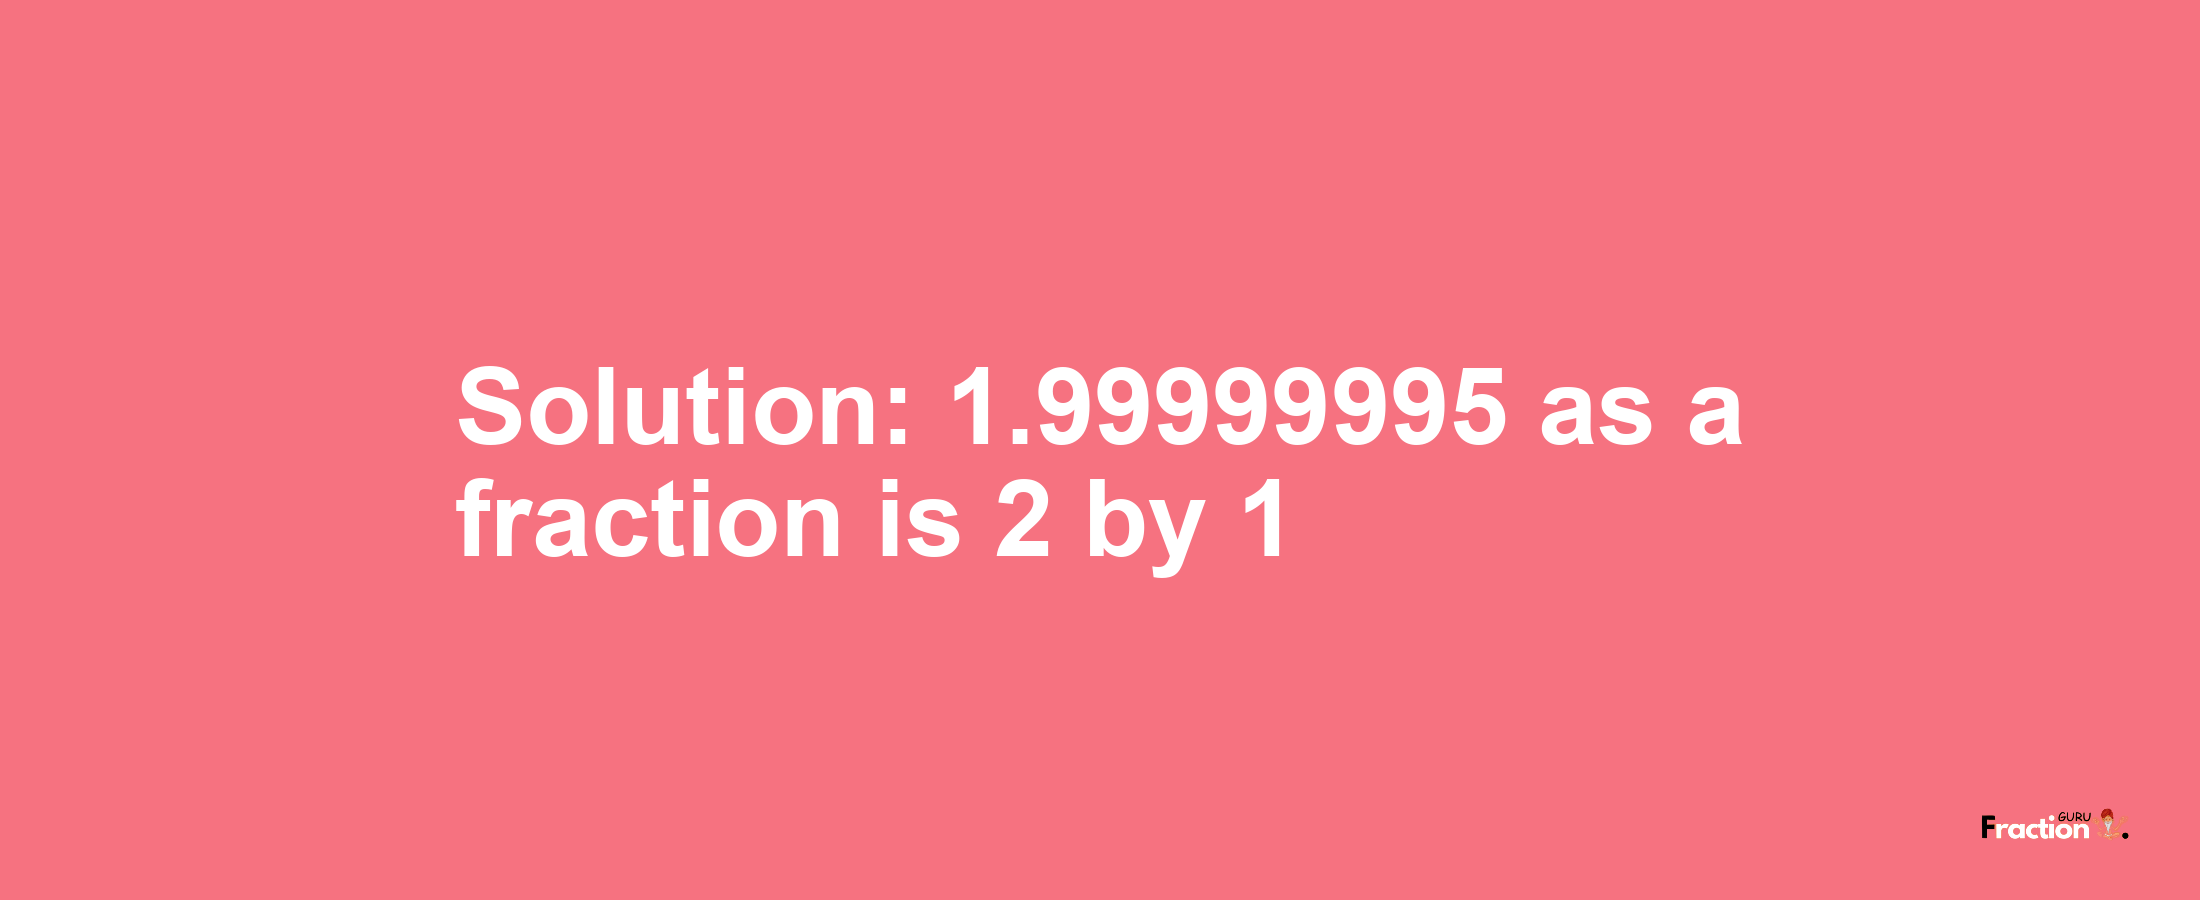 Solution:1.99999995 as a fraction is 2/1